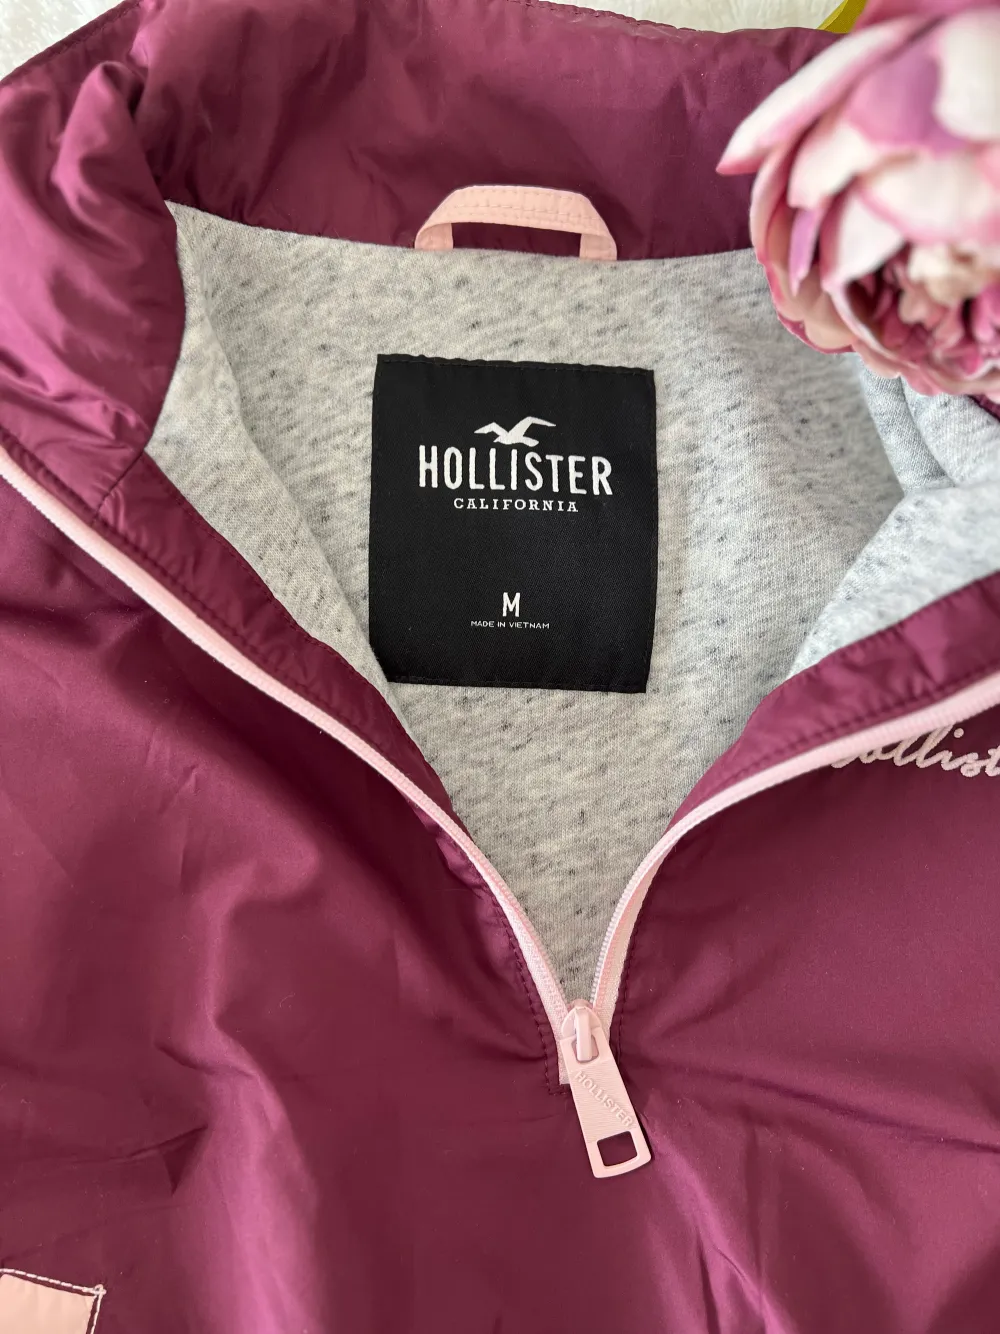 Cropped new jacket from Hollister. Pockets on the sides. #hollister #windbreaker . Hoodies.